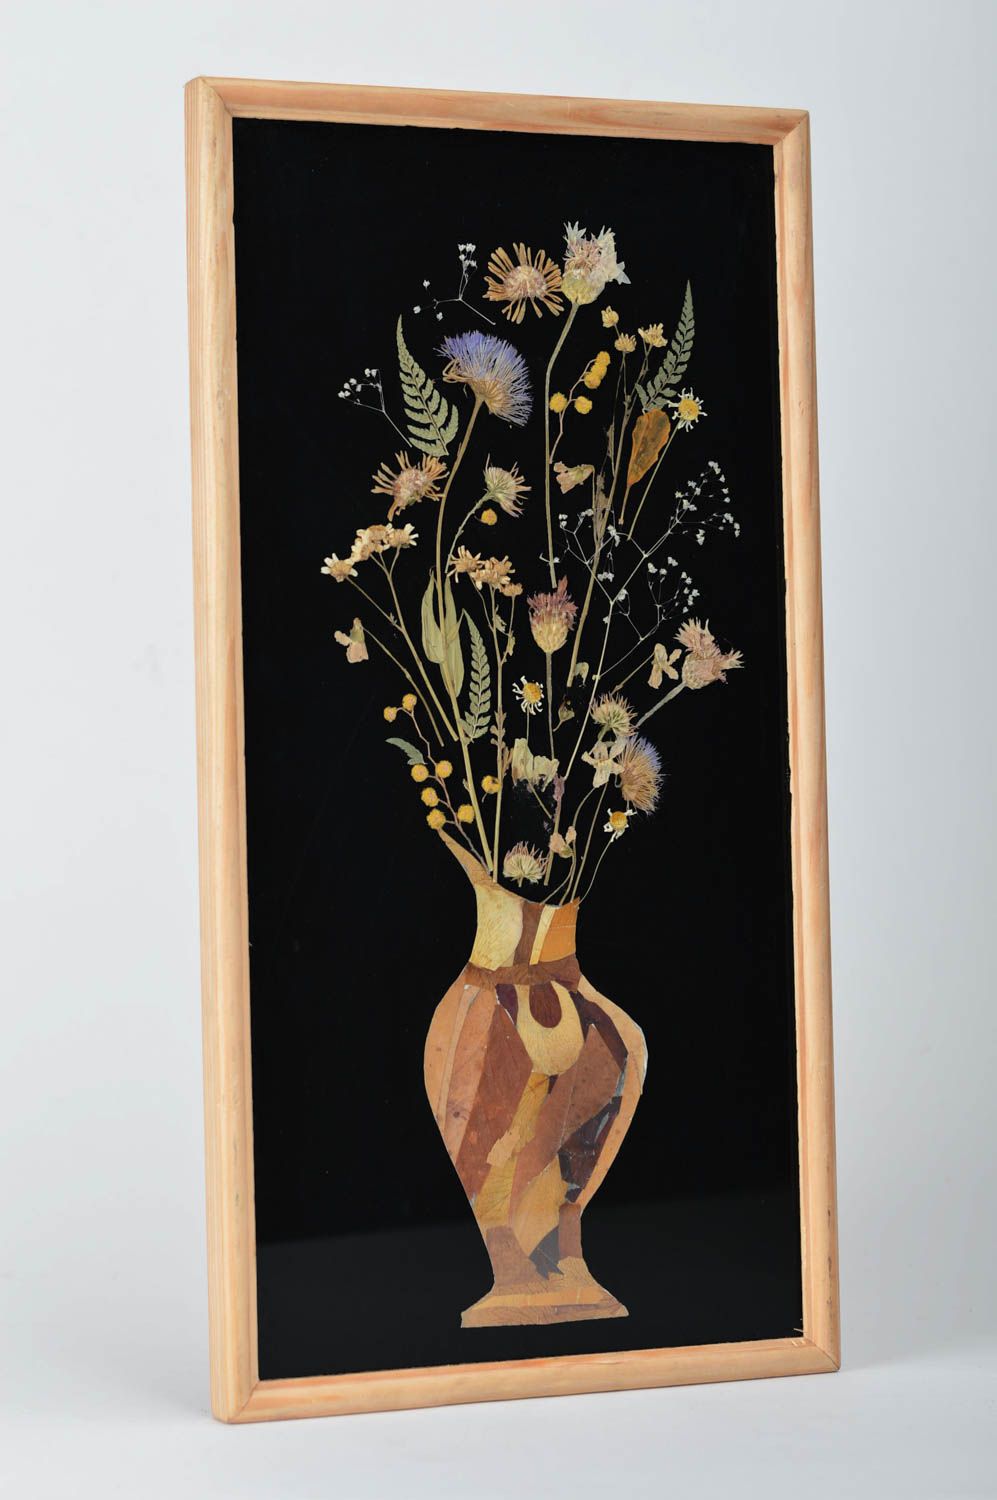 Picture made of dried leaves and flowers handmade still life vase with flowers photo 1